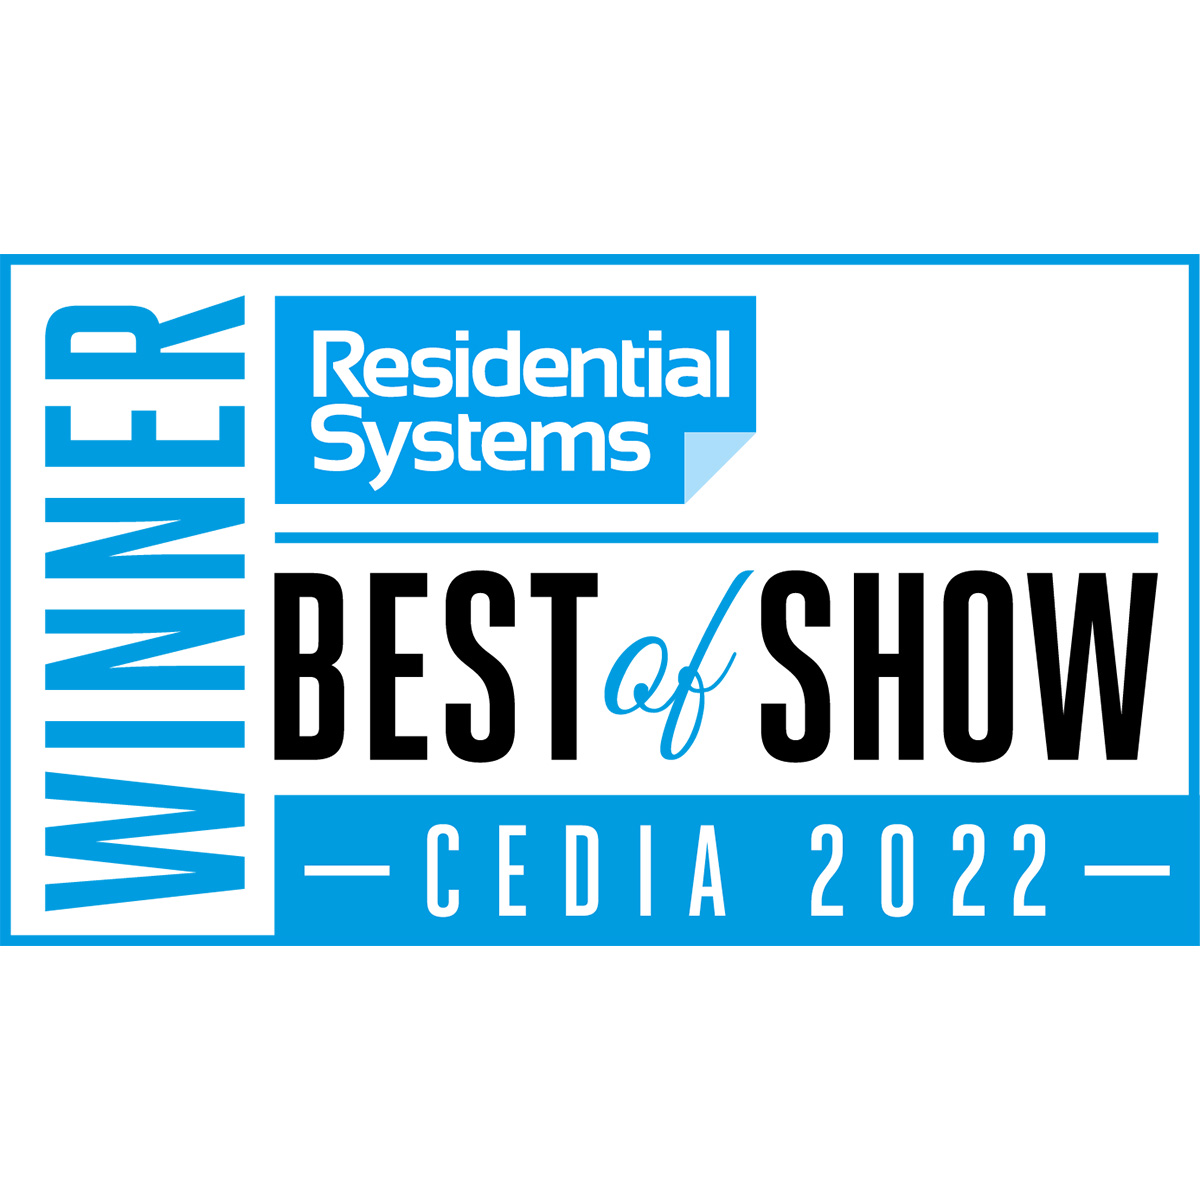 Residential Systems “Best of Show” at CEDIA